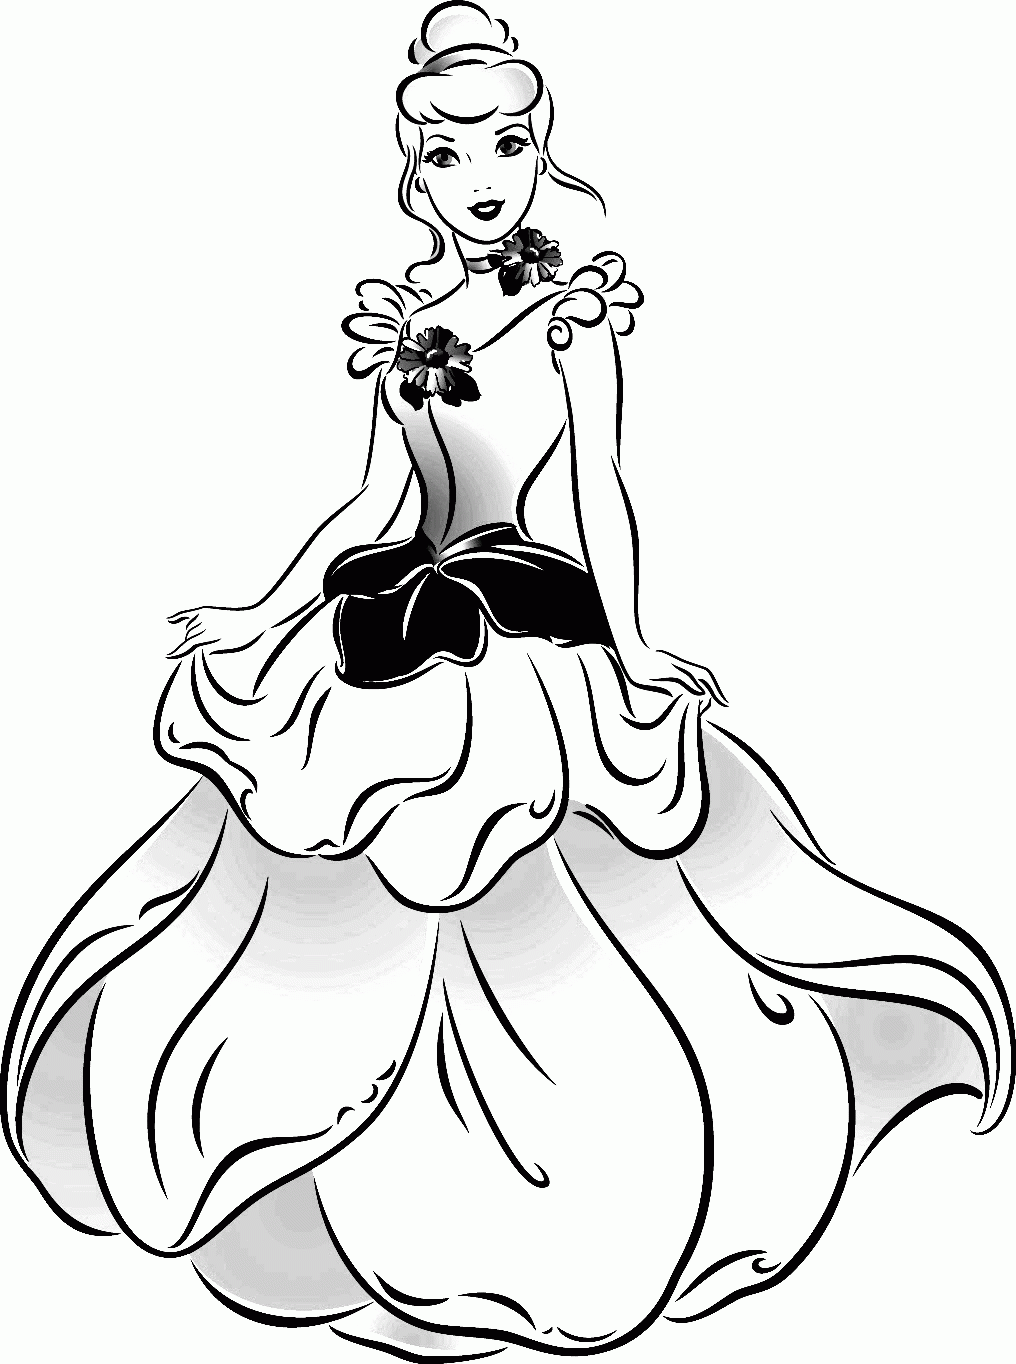 Cinderella Black And White Coloring Pages - Coloring Pages For All ...